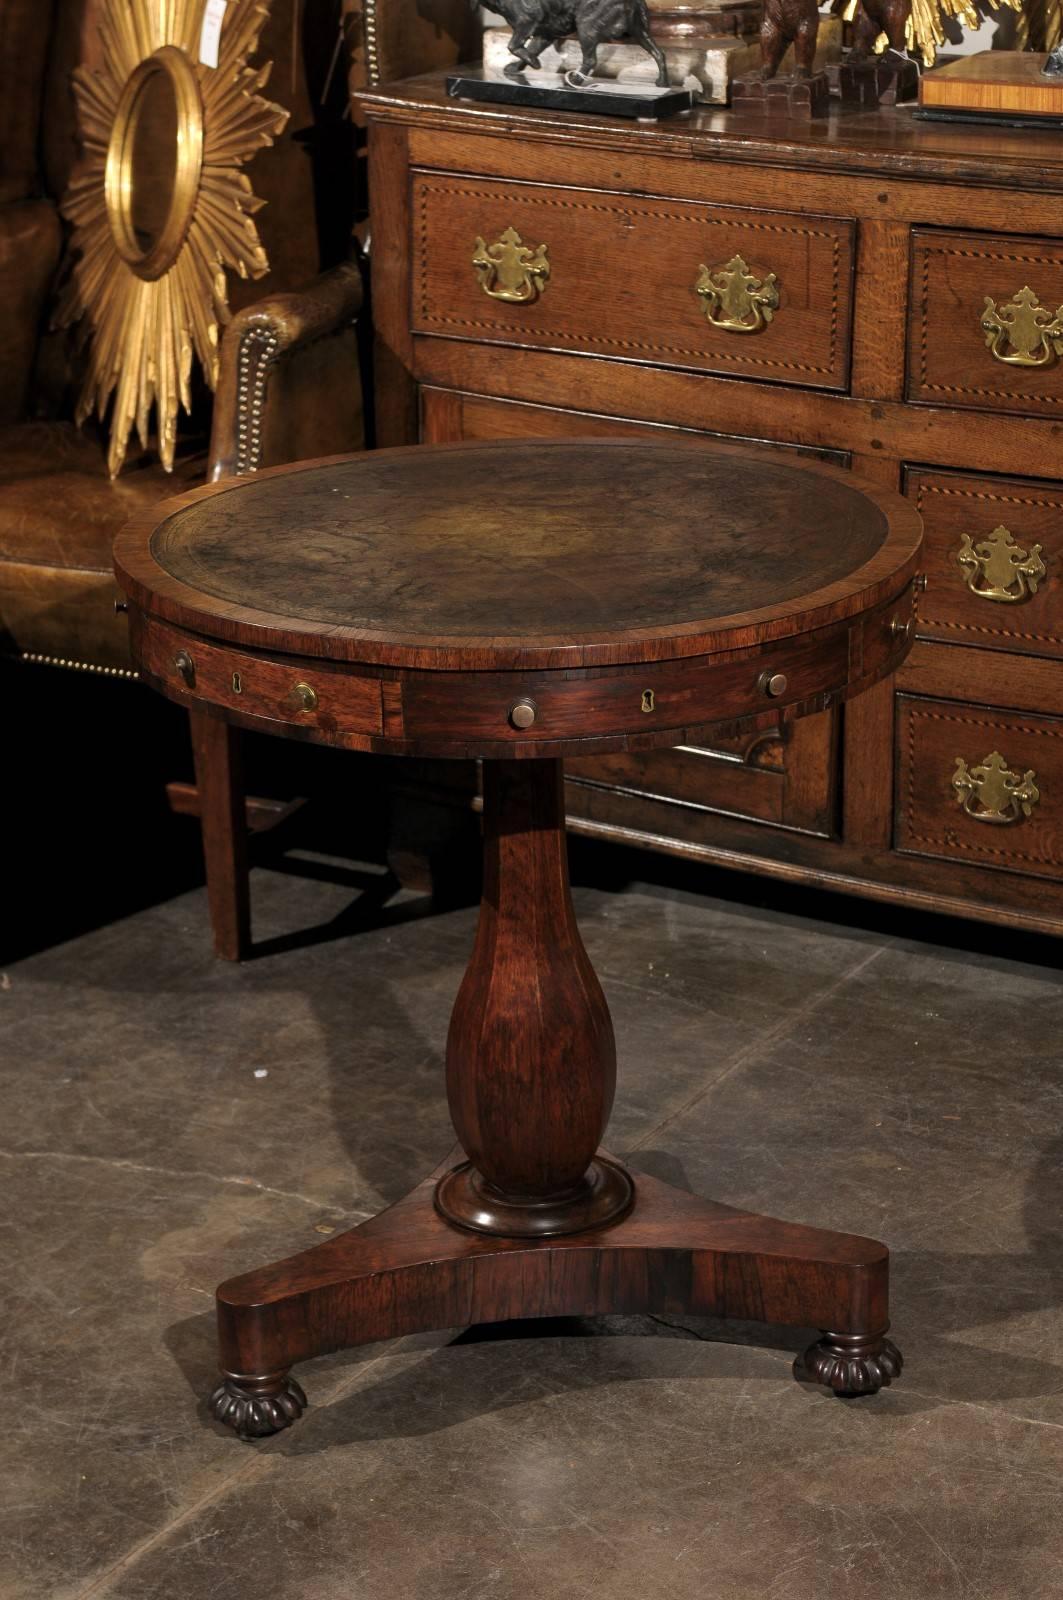 A regency leather top drum table from early 19th century England. This early 19th century Regency drum table features a circular top with leather inset over three drawers (and three faux drawers) with two brass knobs flanking a brass insert keyhole